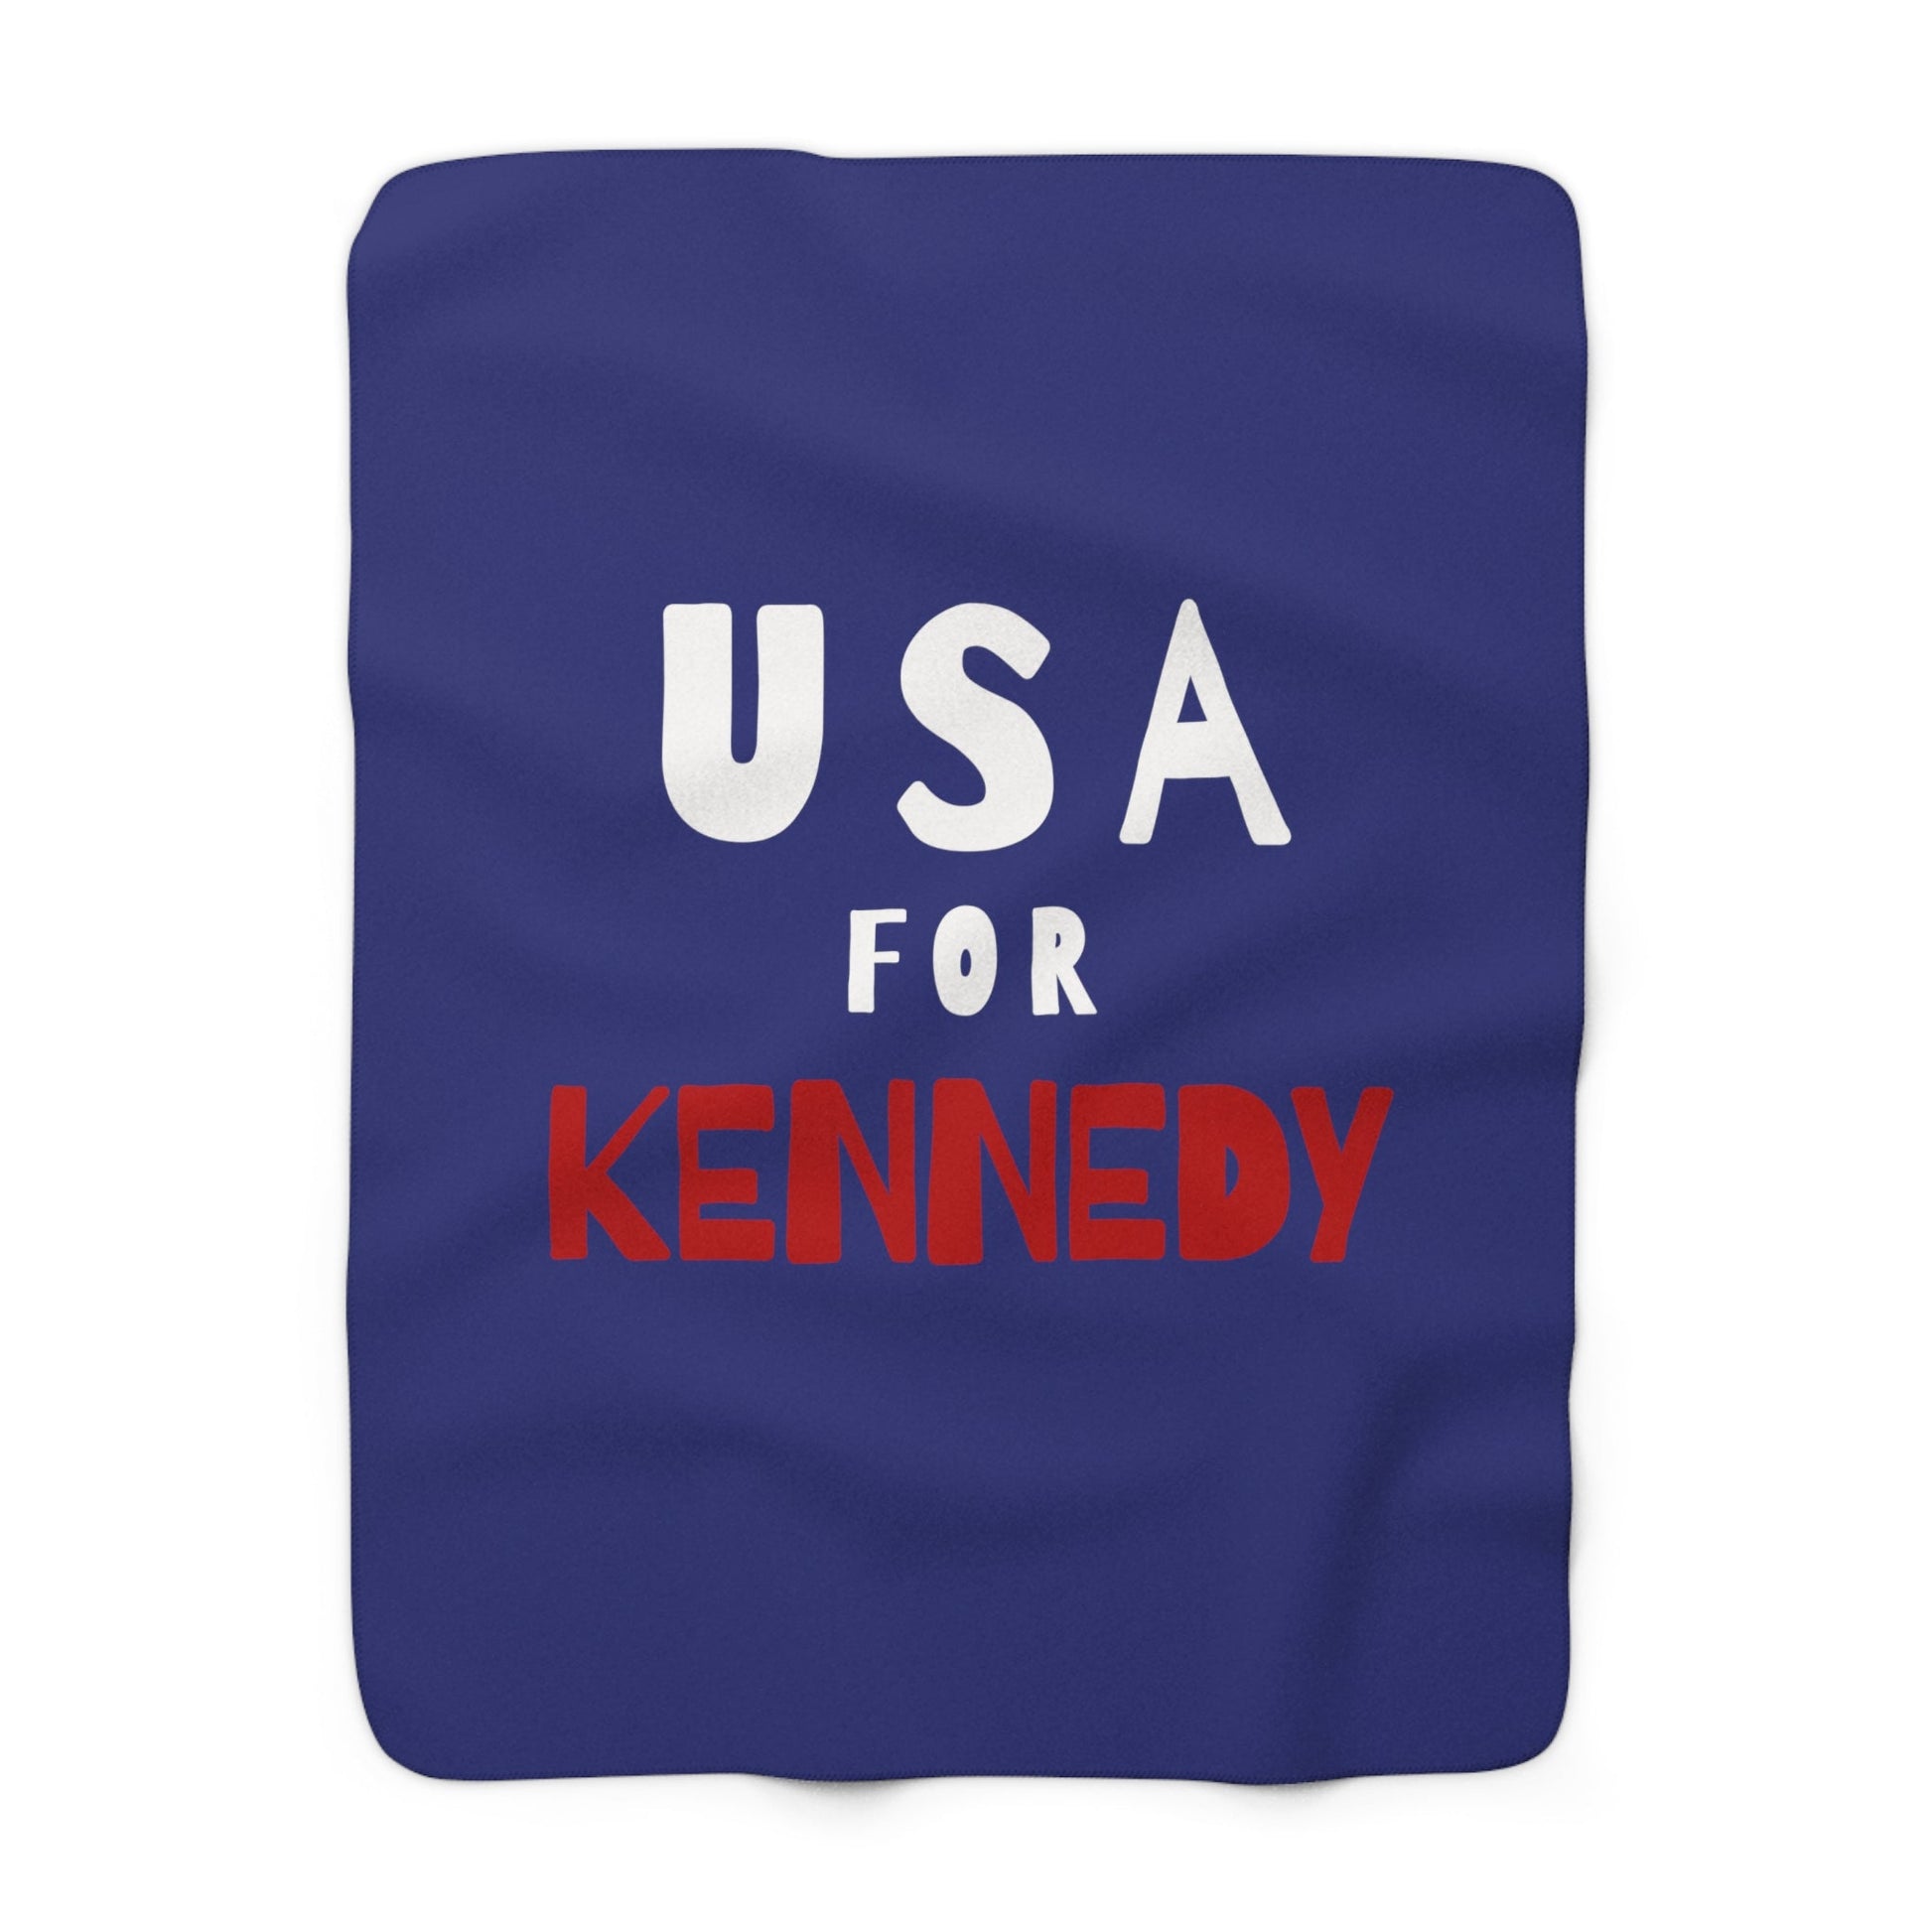 USA for Kennedy Sherpa Fleece Blanket - TEAM KENNEDY. All rights reserved